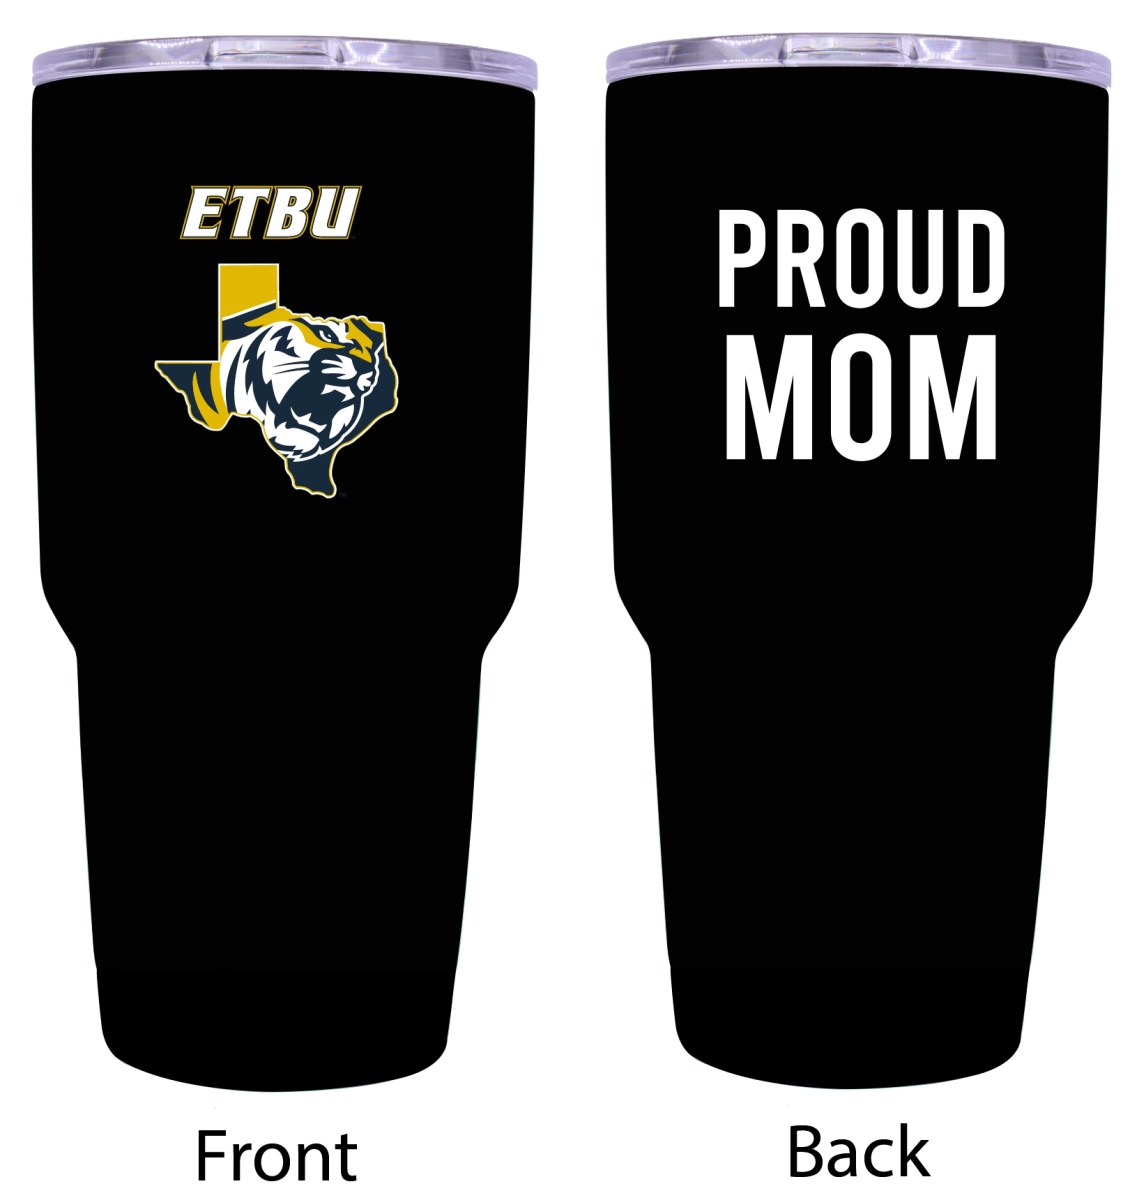 Picture of R & R Imports ITB-C-ETXB20 MOM East Texas Baptist University Proud Mom 20 oz Insulated Stainless Steel Tumblers